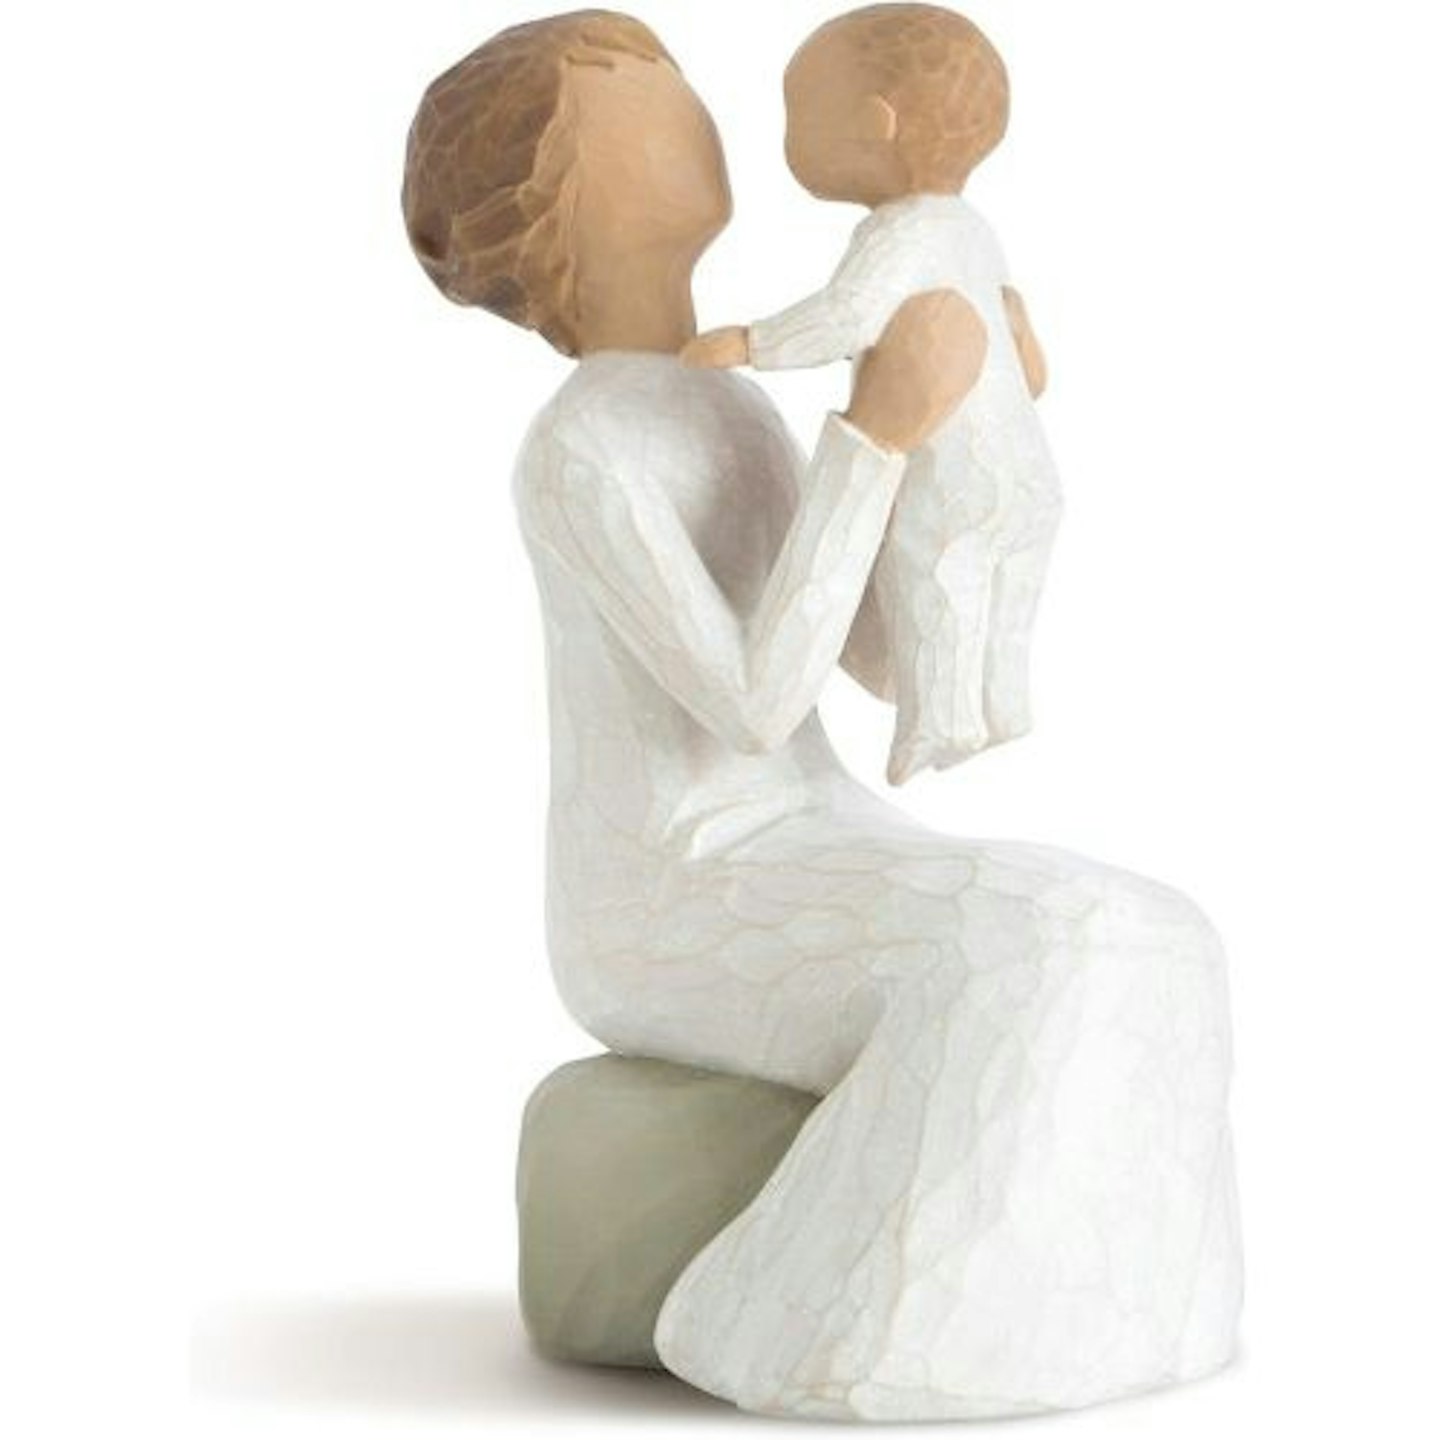 Best gifts for grandma Willow Tree Grandmother Figurine